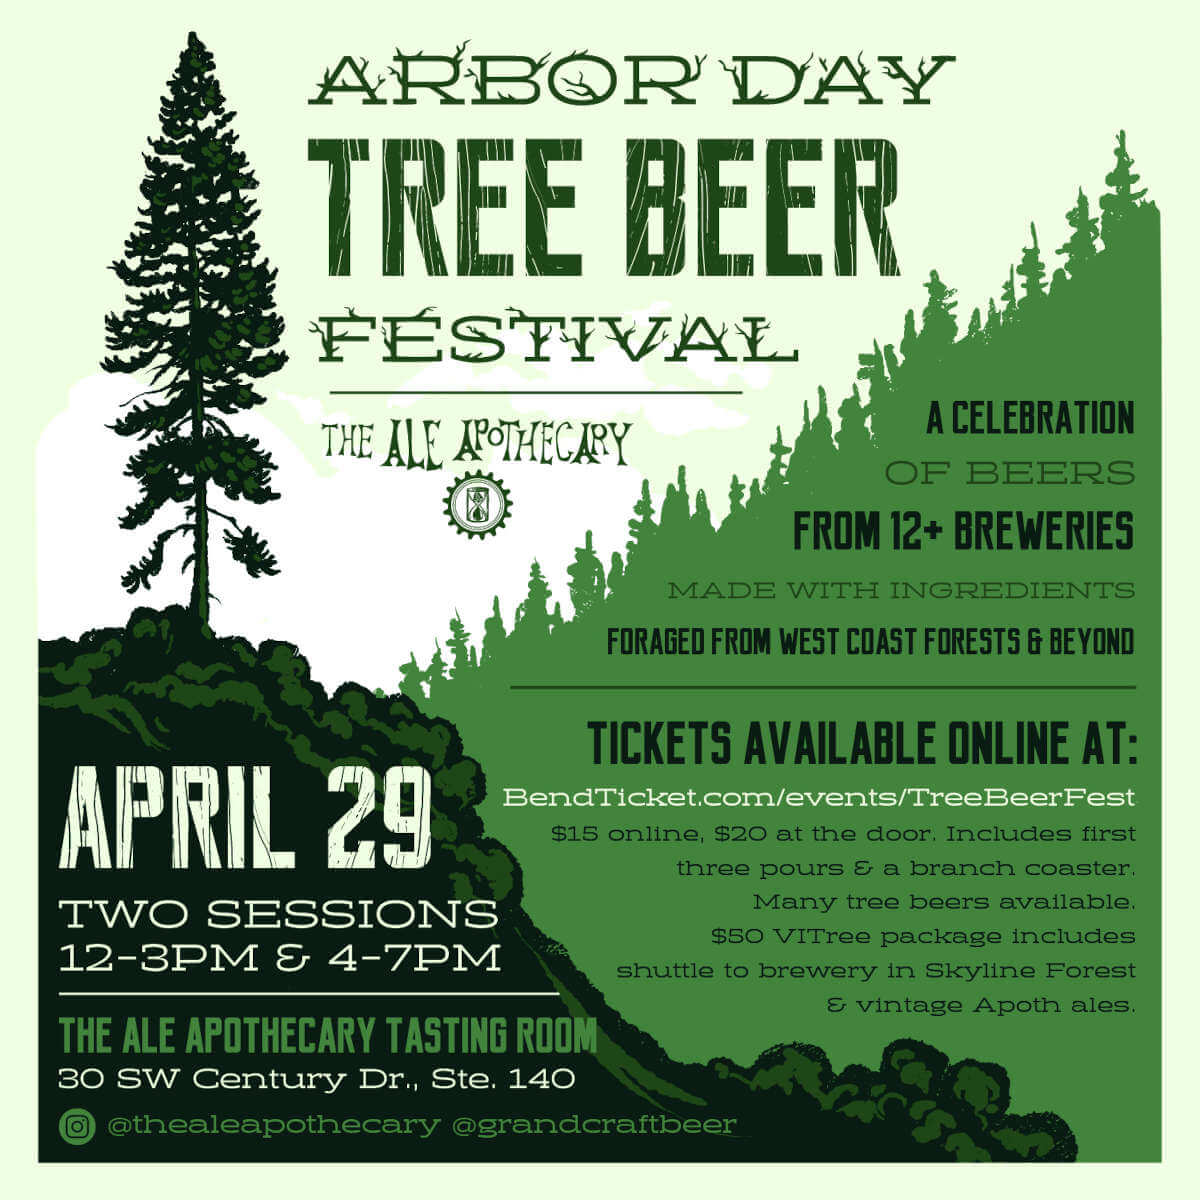 Celebrate Arbor Day attending the inaugural Tree Beer Festival